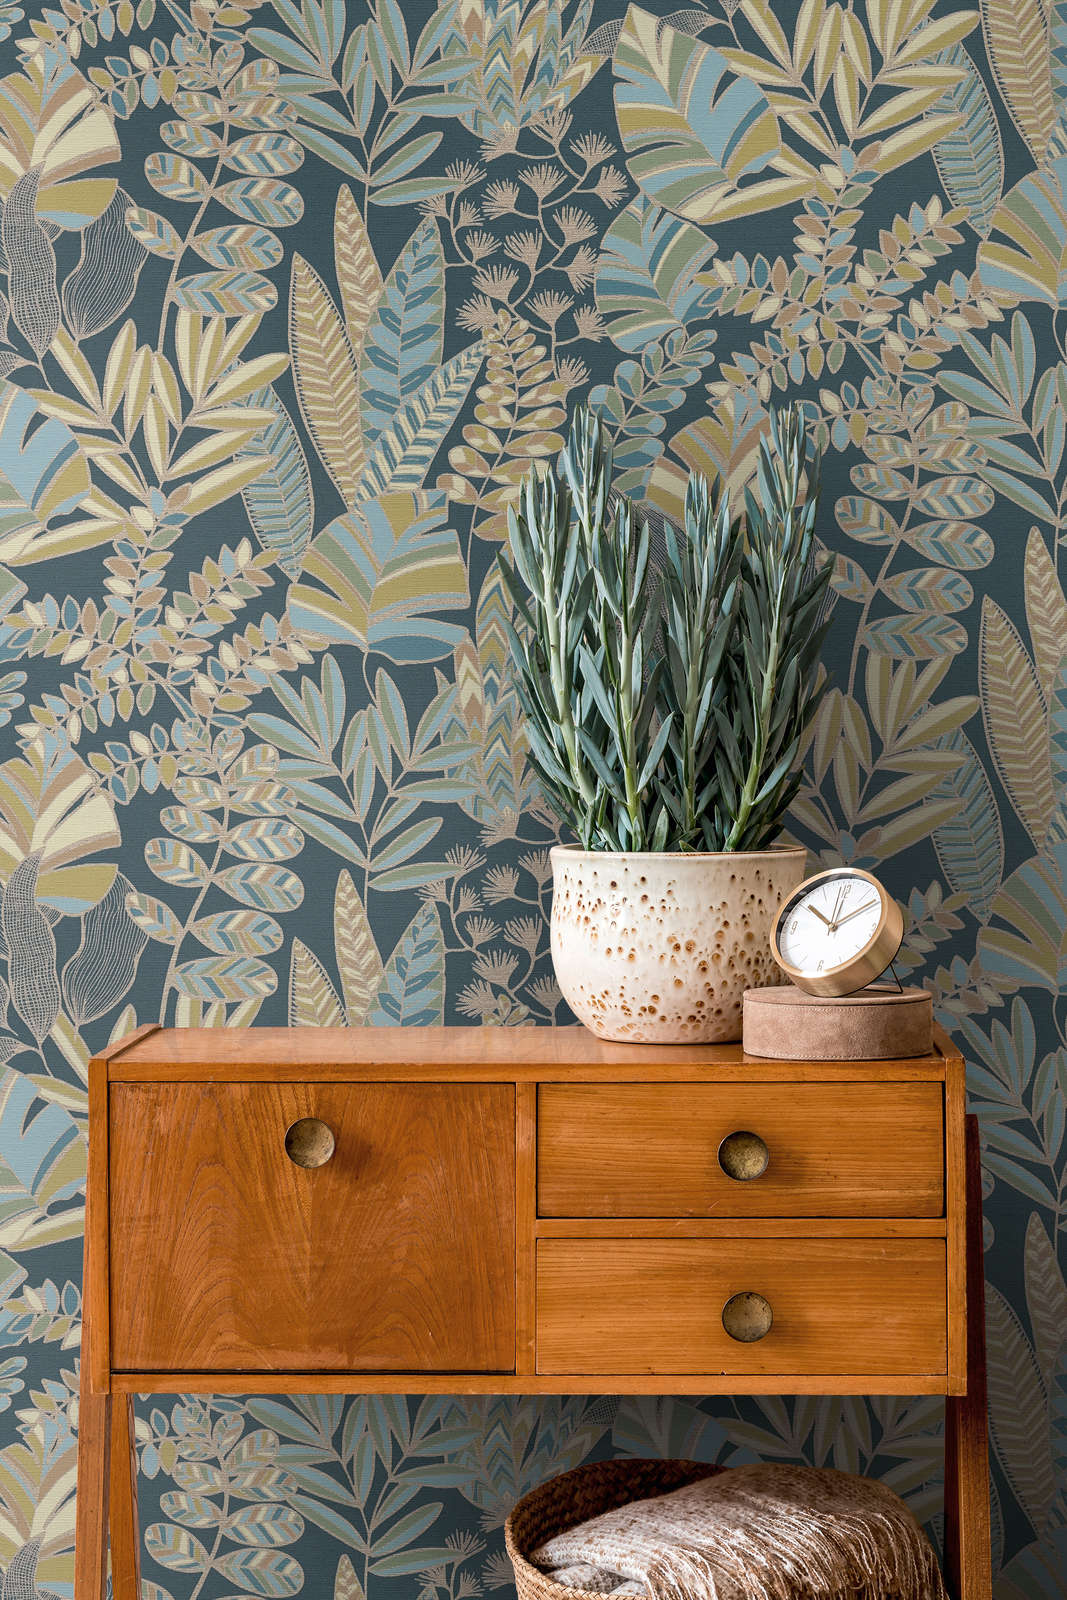             Jungle style non-woven wallpaper with gloss effect - blue, gold, green
        